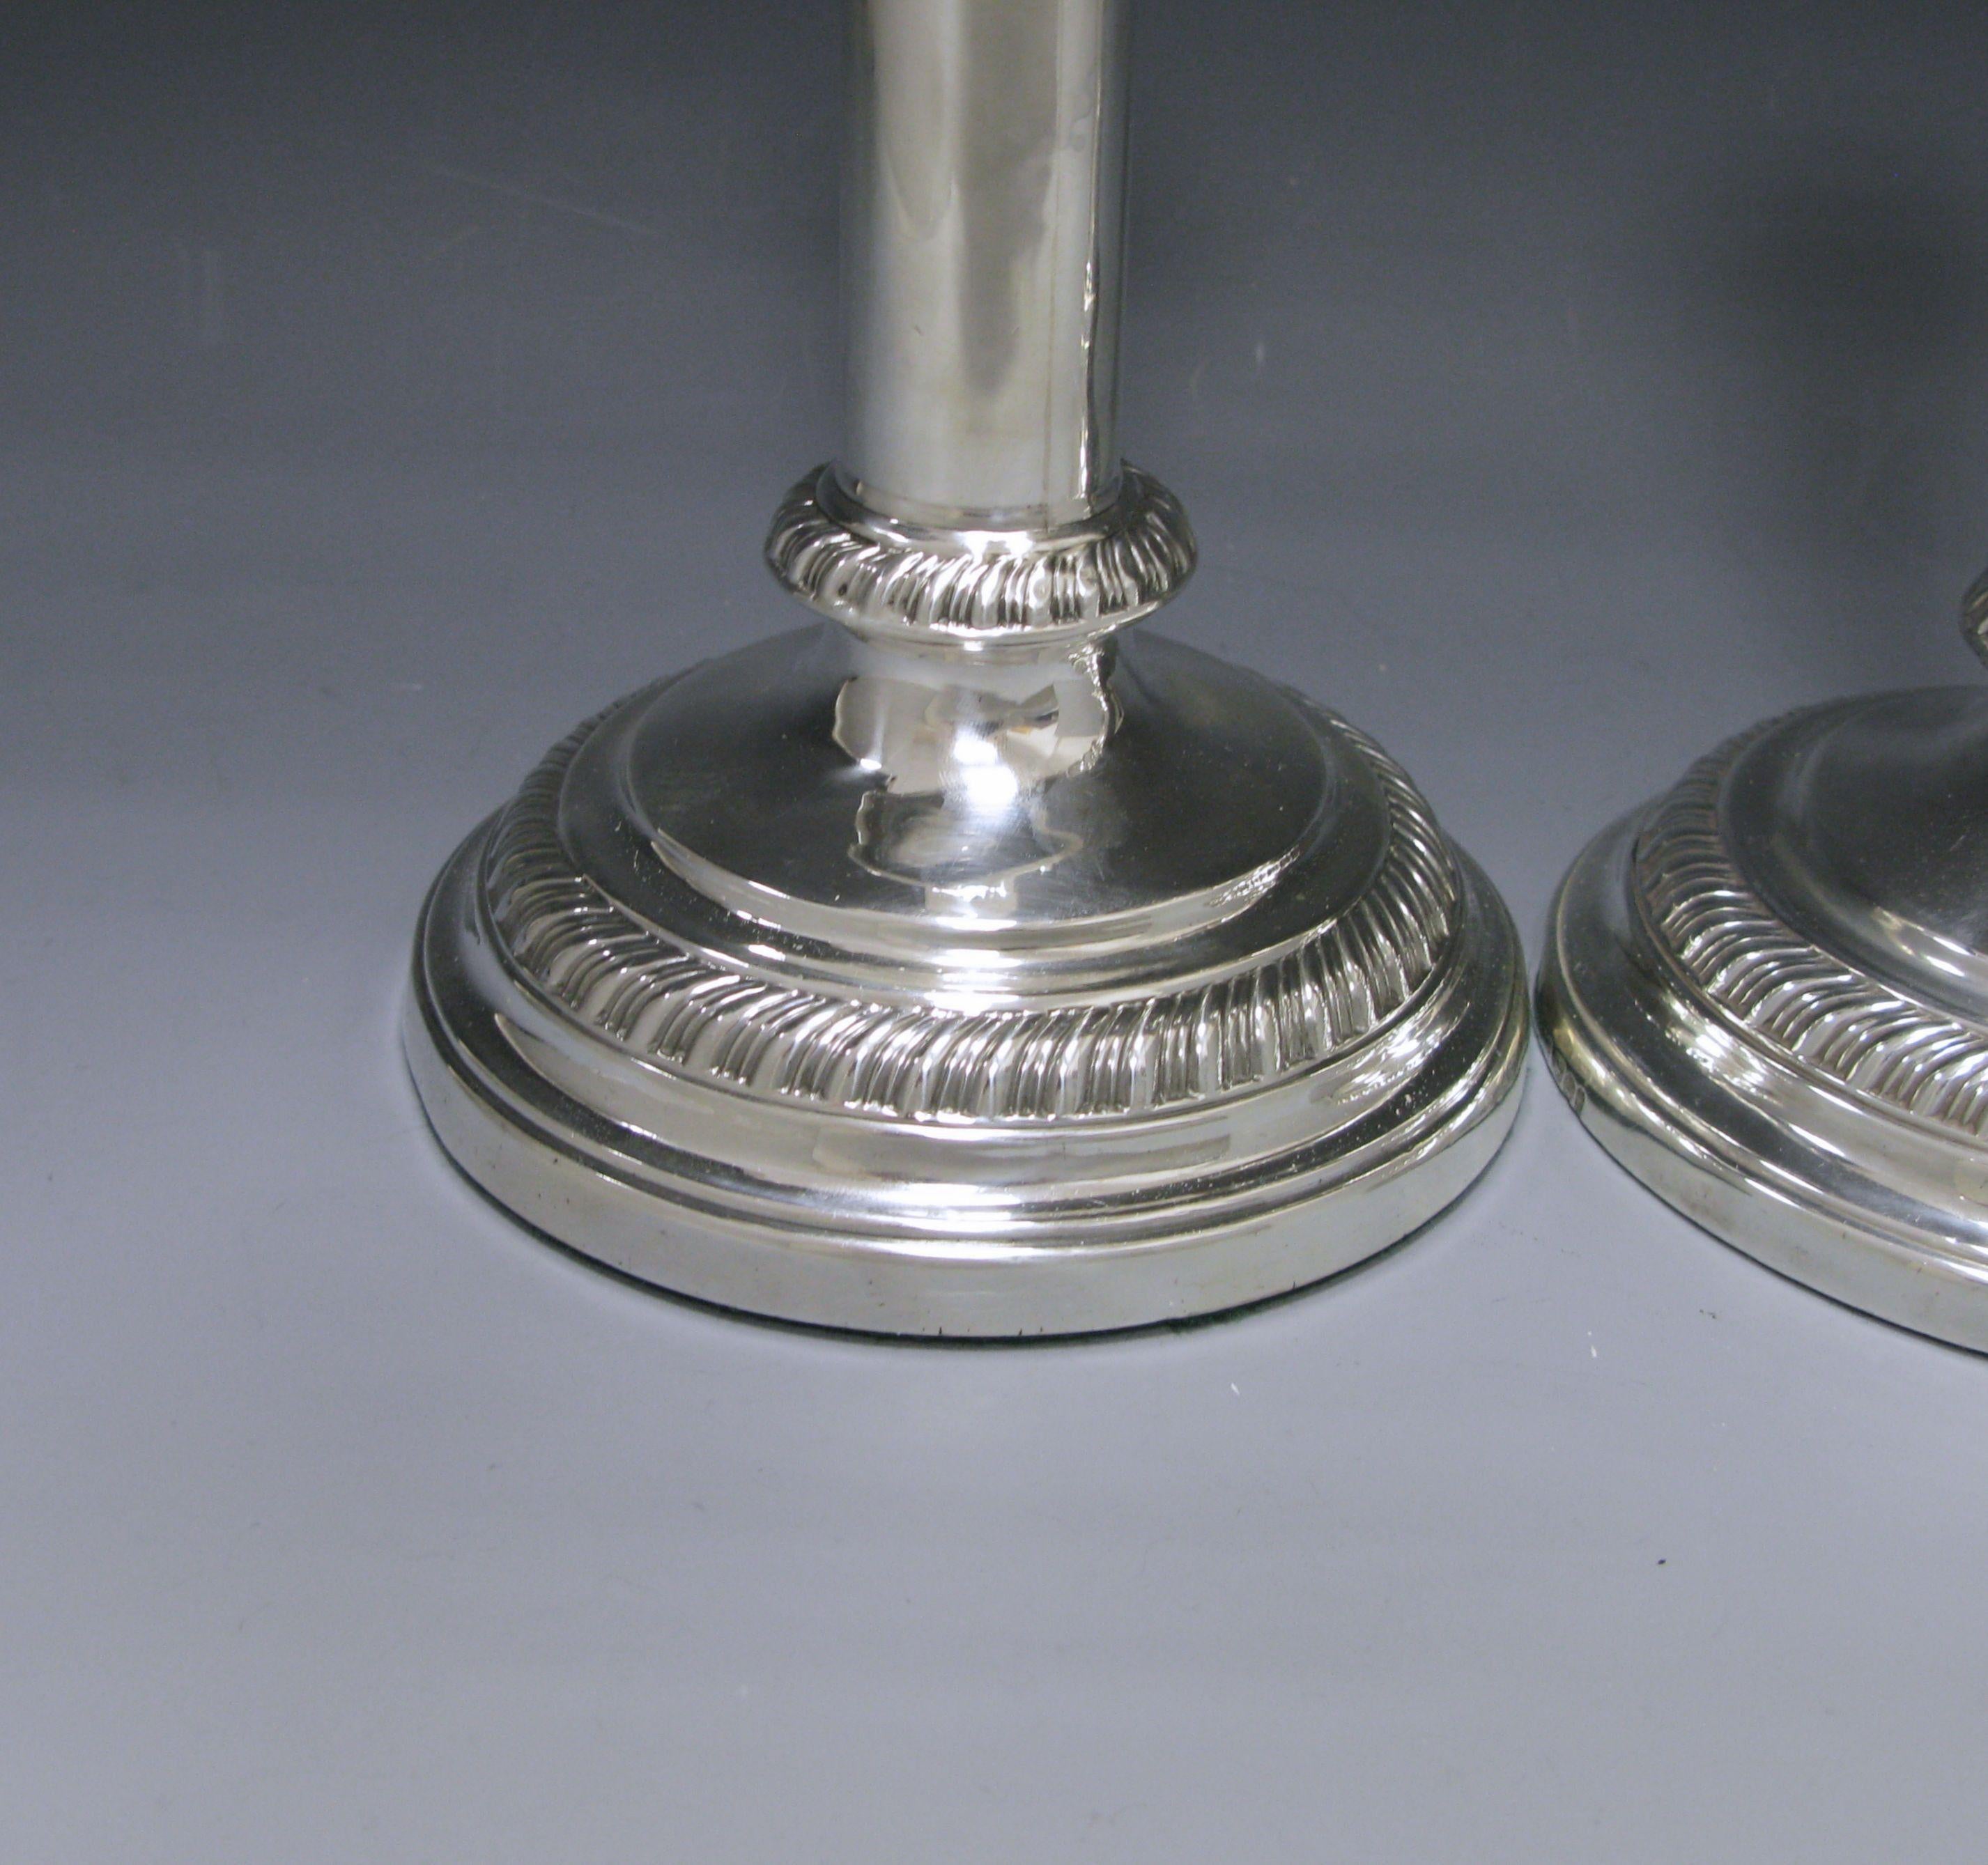 A pair of rare antique silver telescopic candlesticks with round gadroon border bases, the border is also repeated on the detachable nozzle.

Measures: Height when not extended 8.25 inches 21 cm.
Height when extended 10.75 inches 27.4 cm.